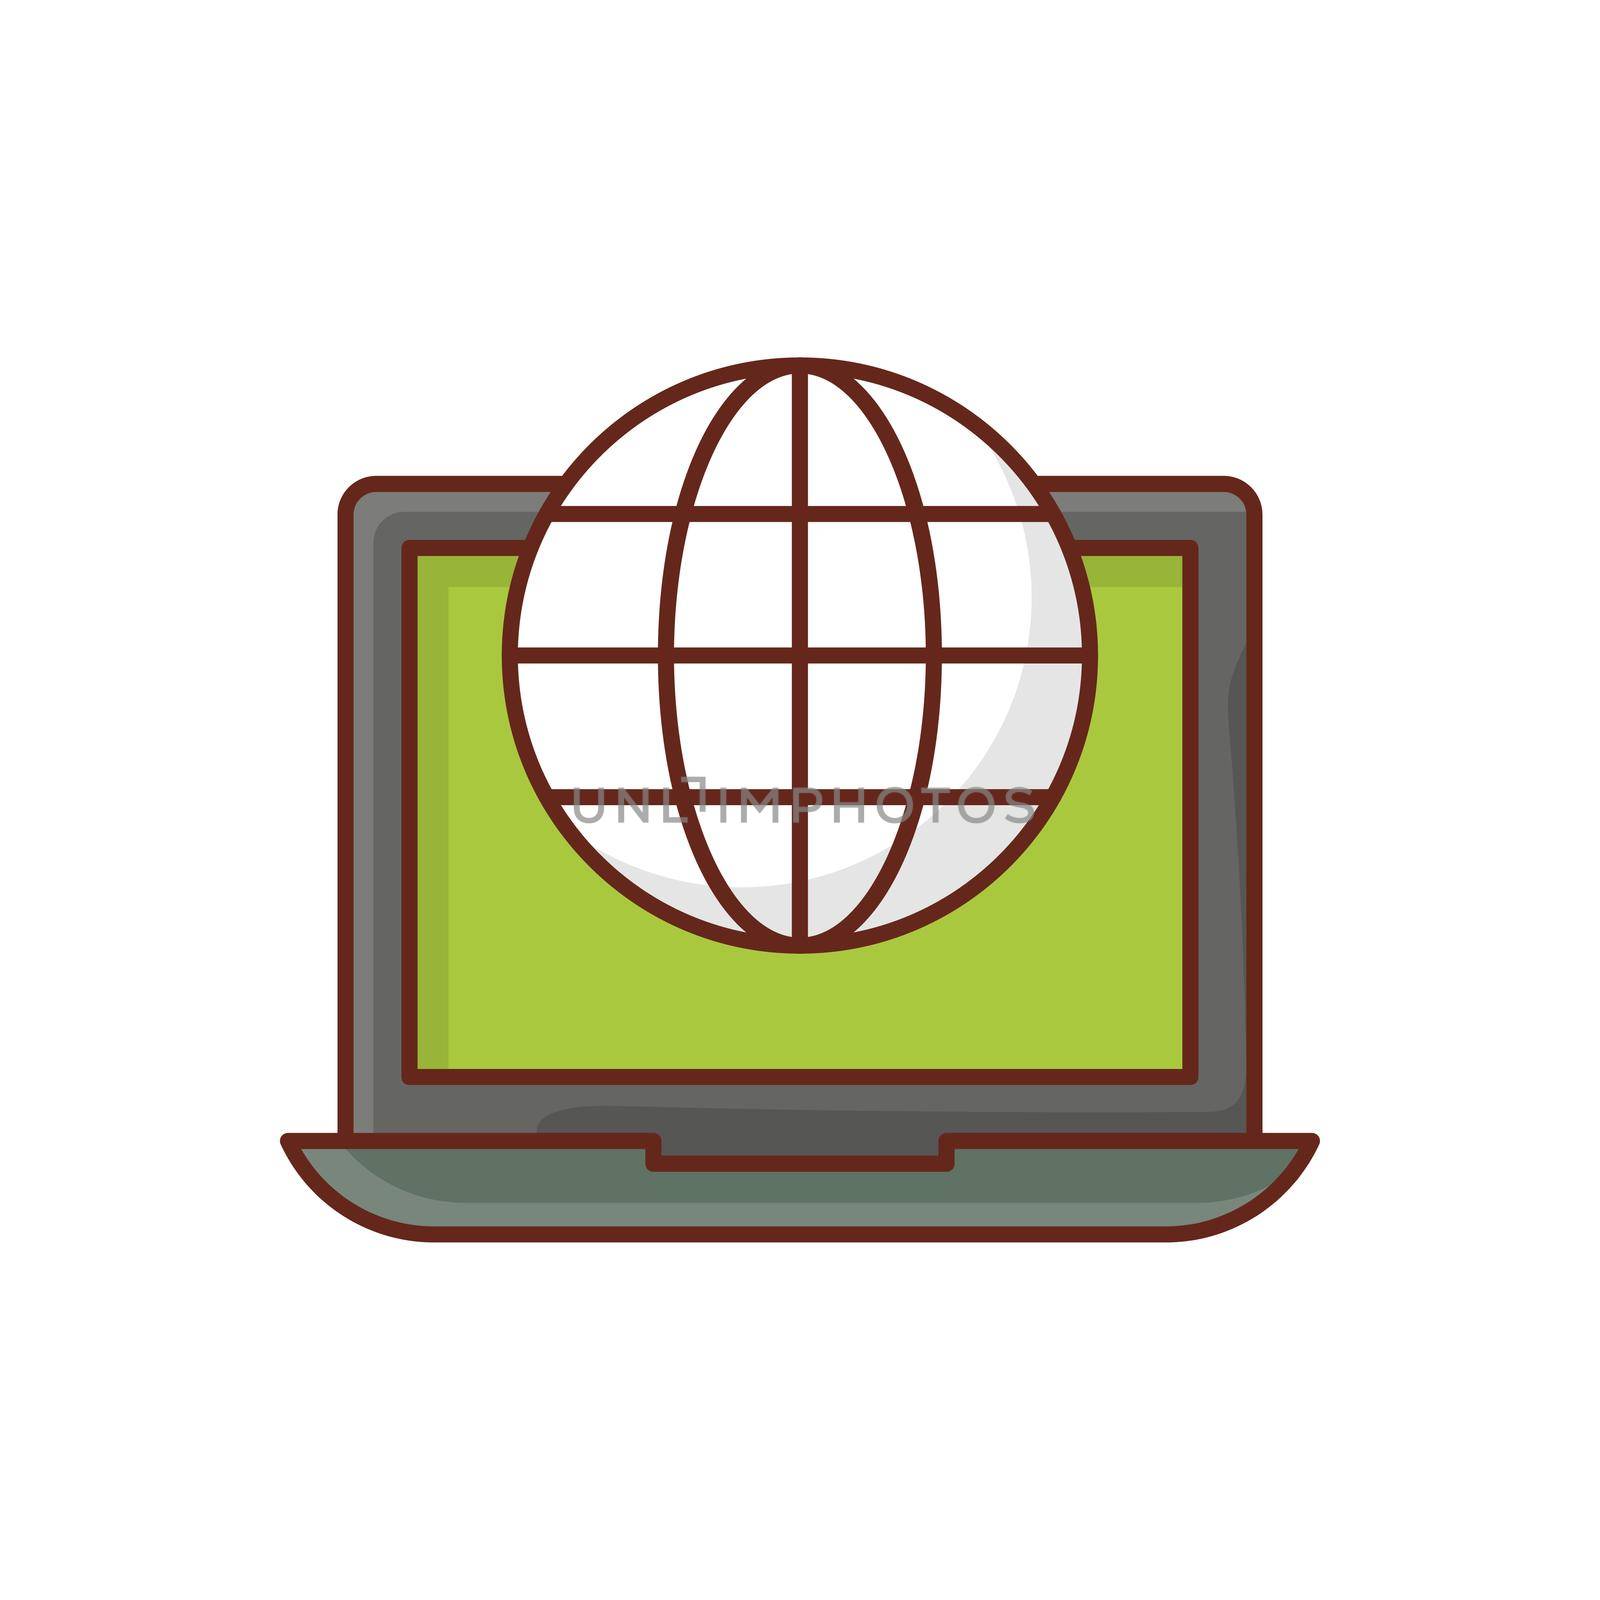 global by FlaticonsDesign